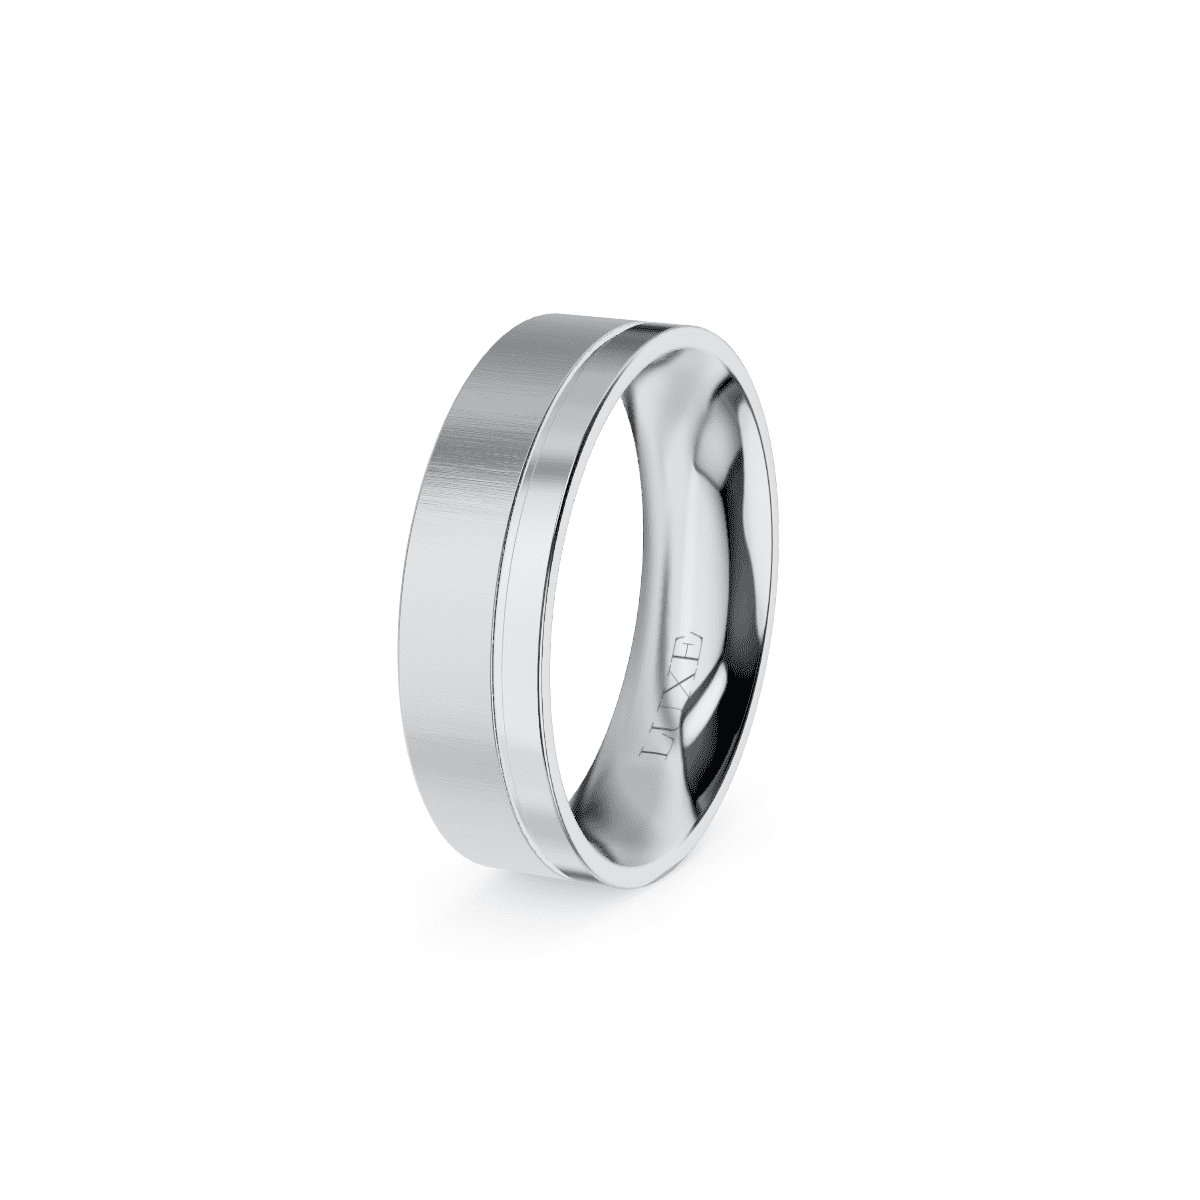 Assisi Pt Ring - Luxe Wedding Rings